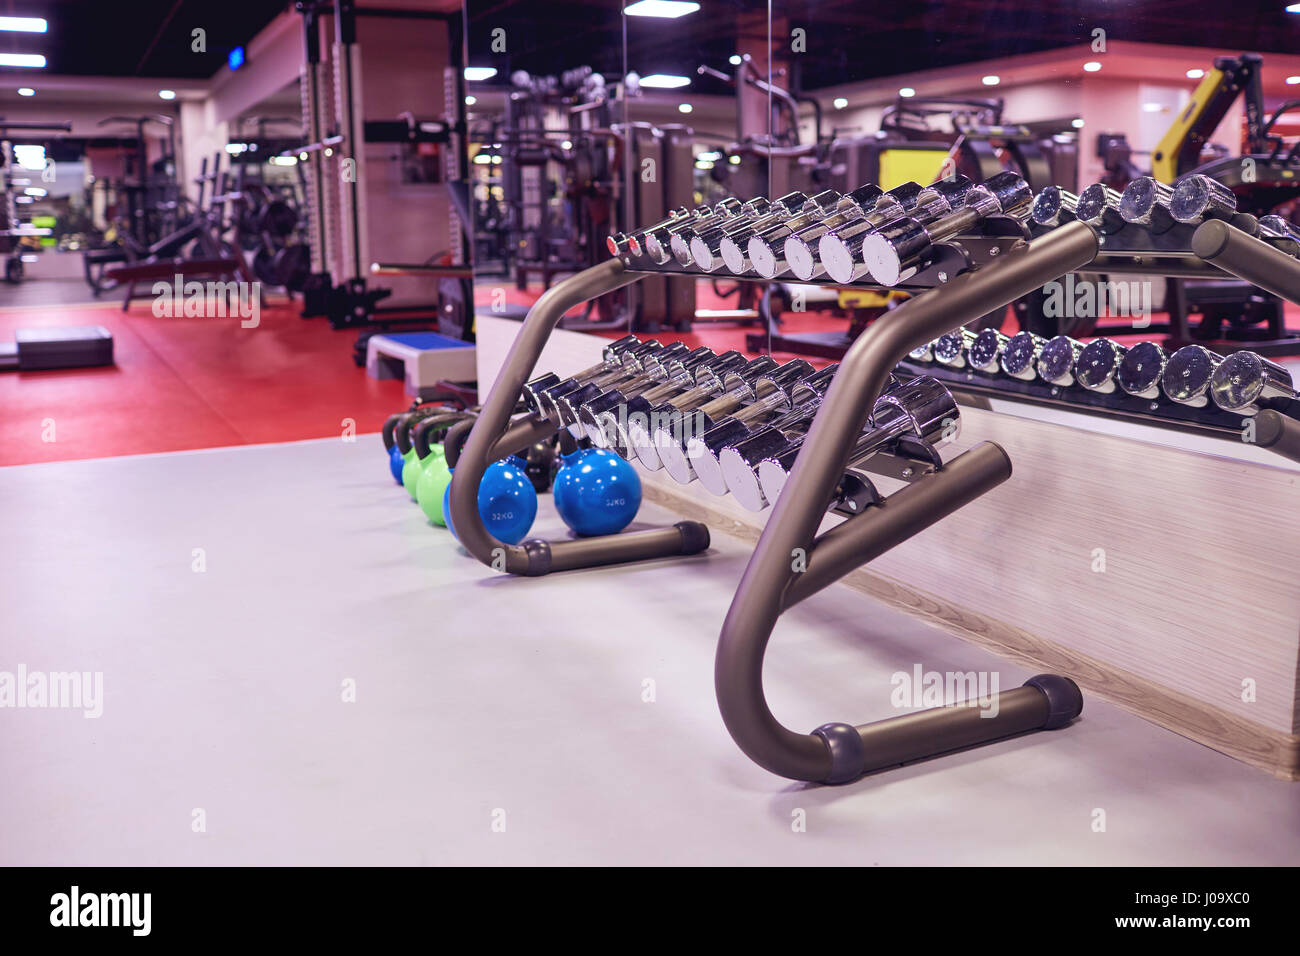 Sports dumbbells weights  in the gym interior Stock Photo